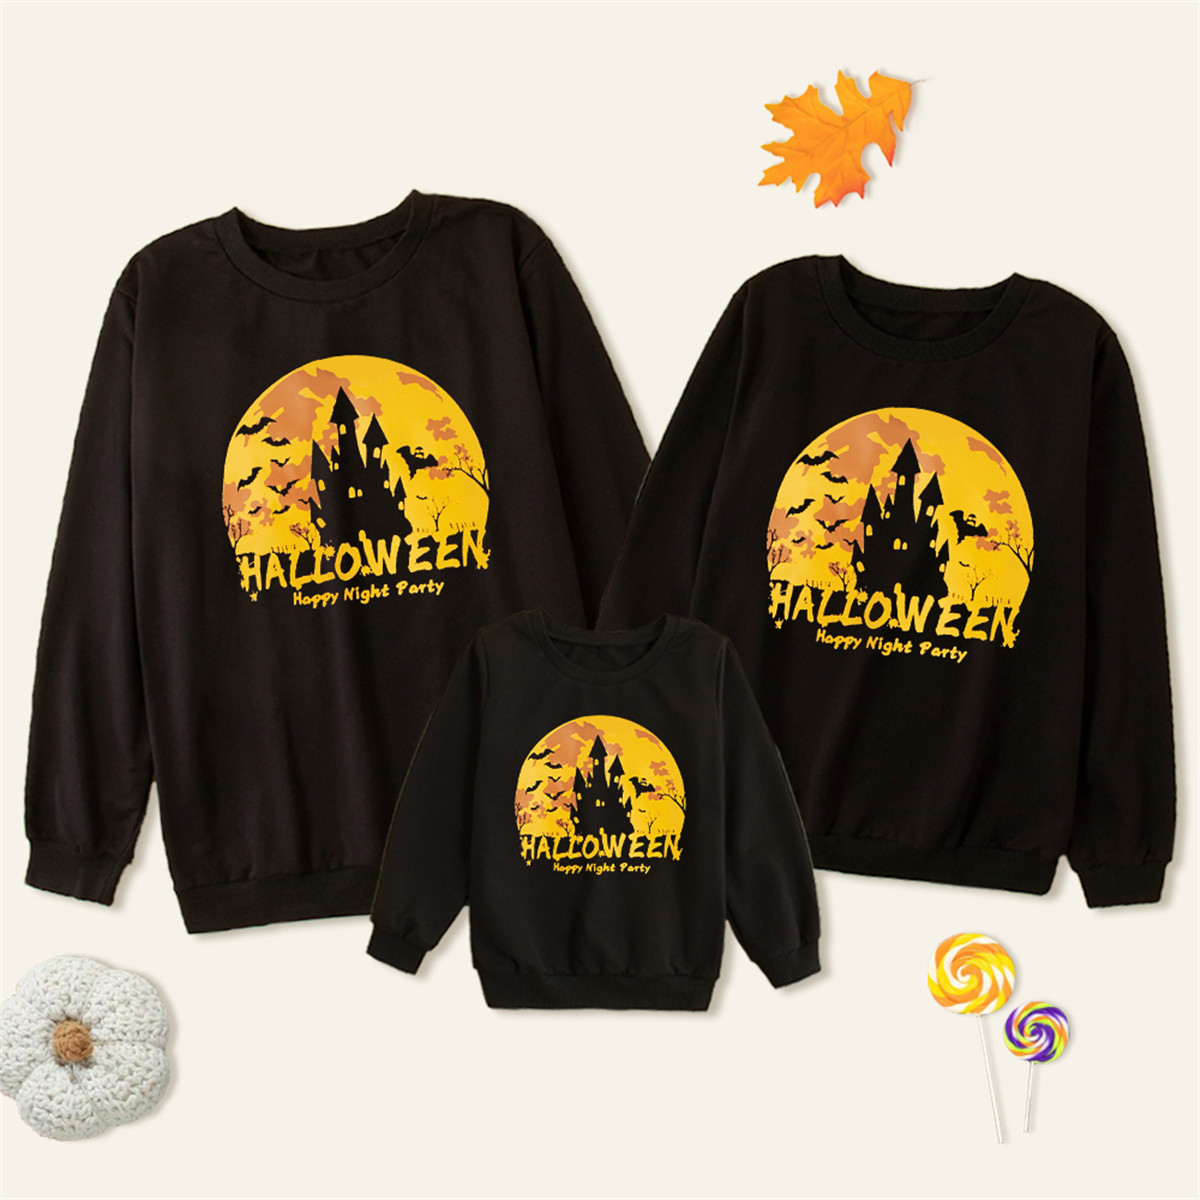 Riolio Family Clothing HALLOWEEN Letter Printed Sweater Wholesale